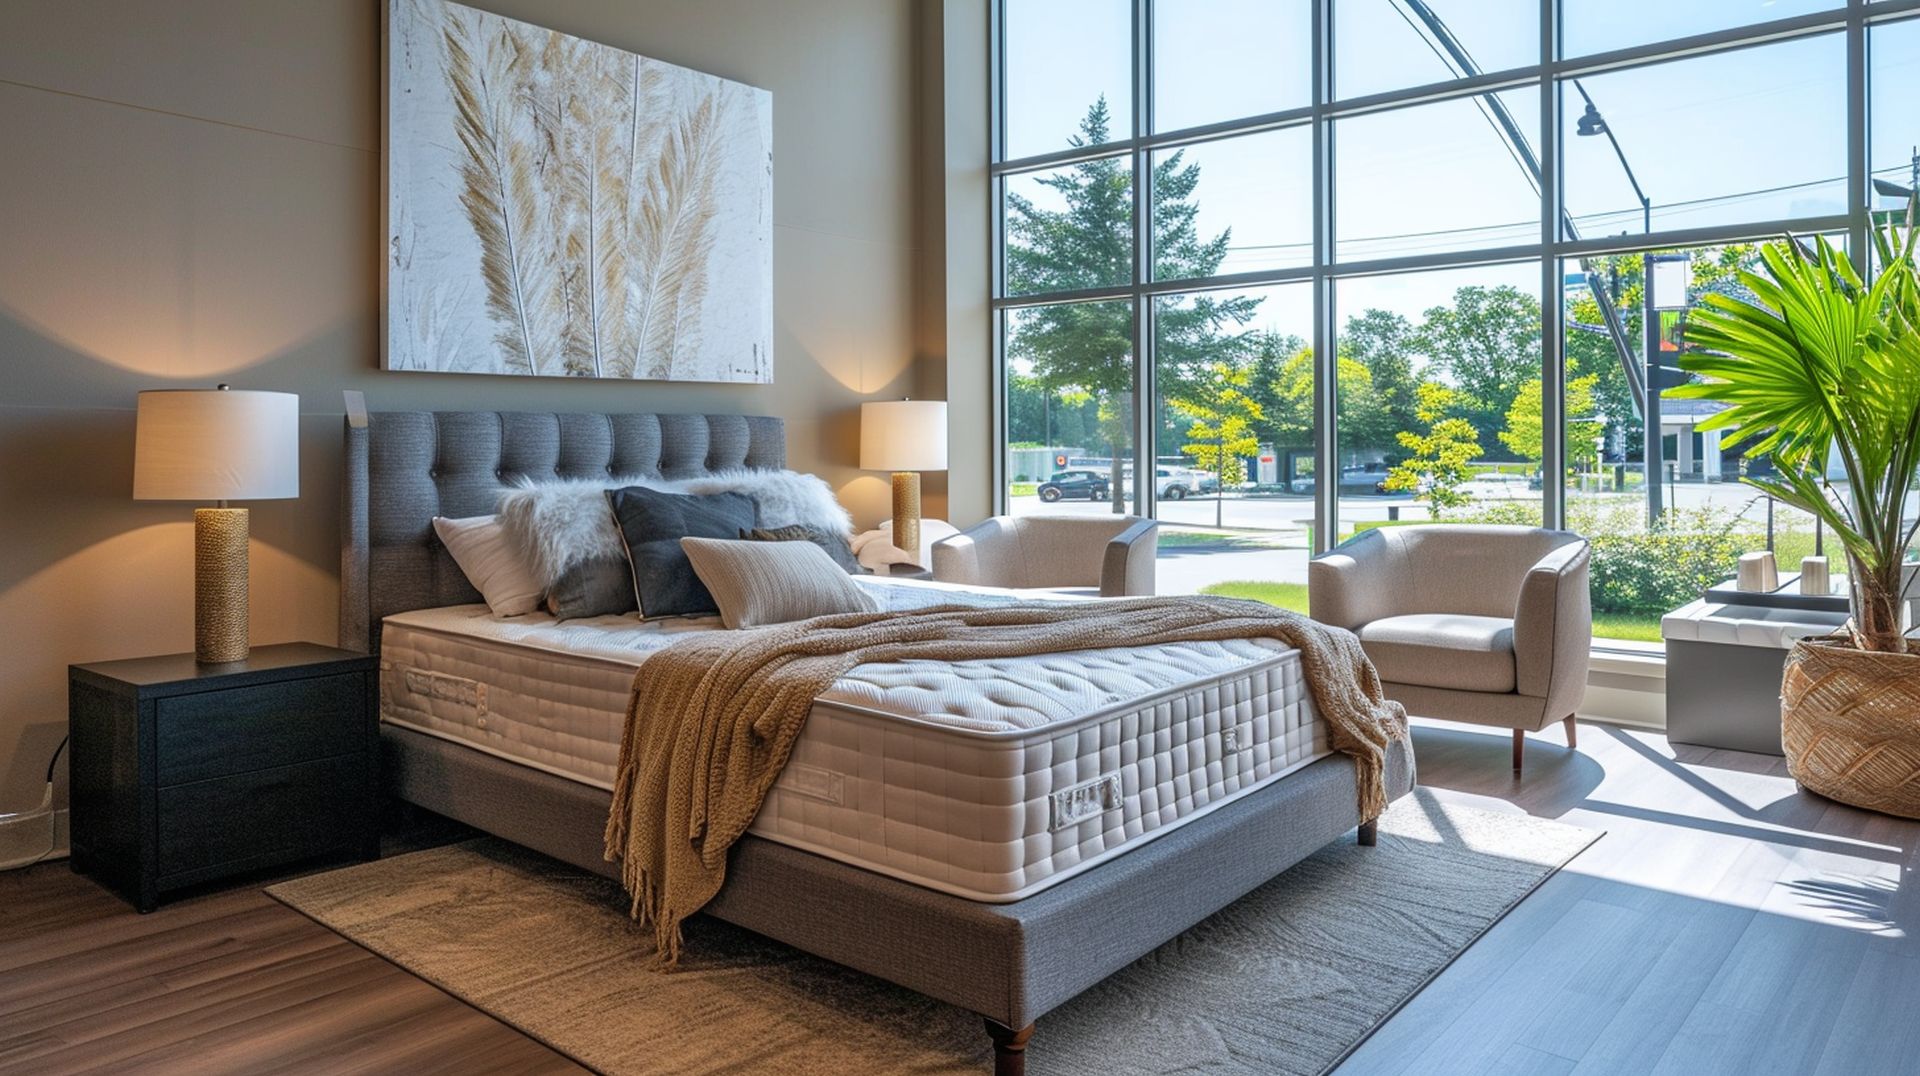 If you're looking for a new bed, mattress stores in Tracy offer the best customer and delivery service, financing, and warranties in California